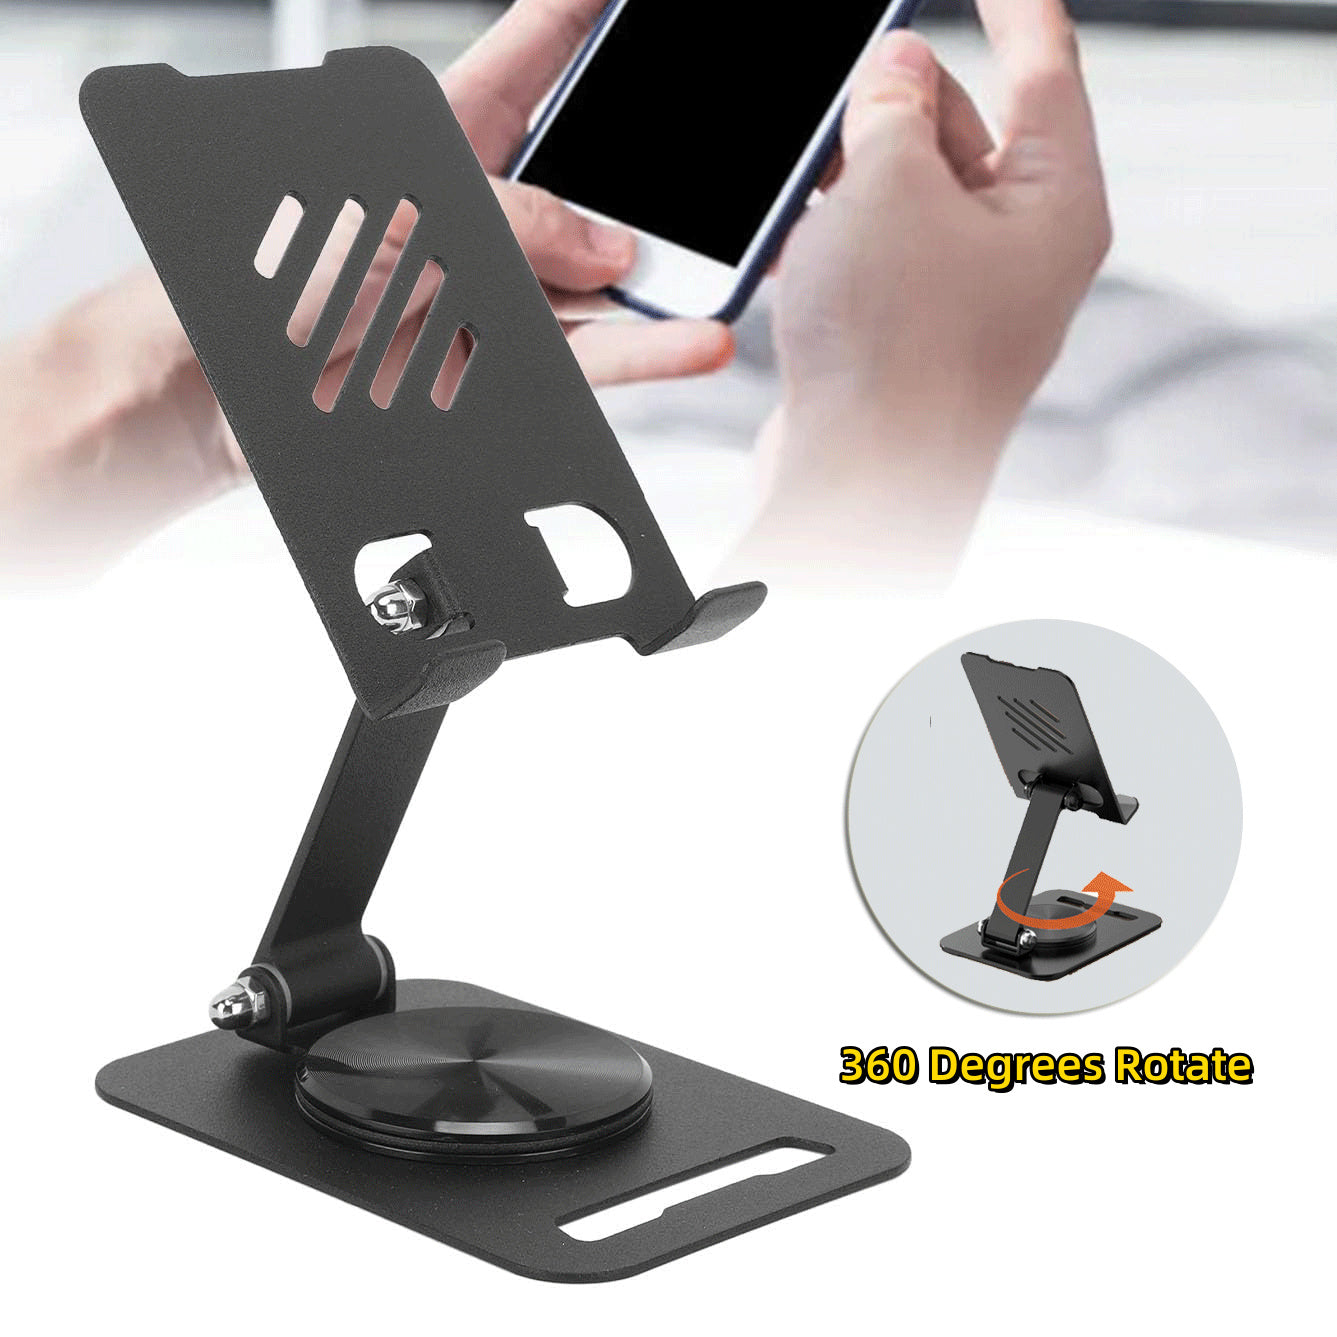 360° rotating phone and tablet stand.